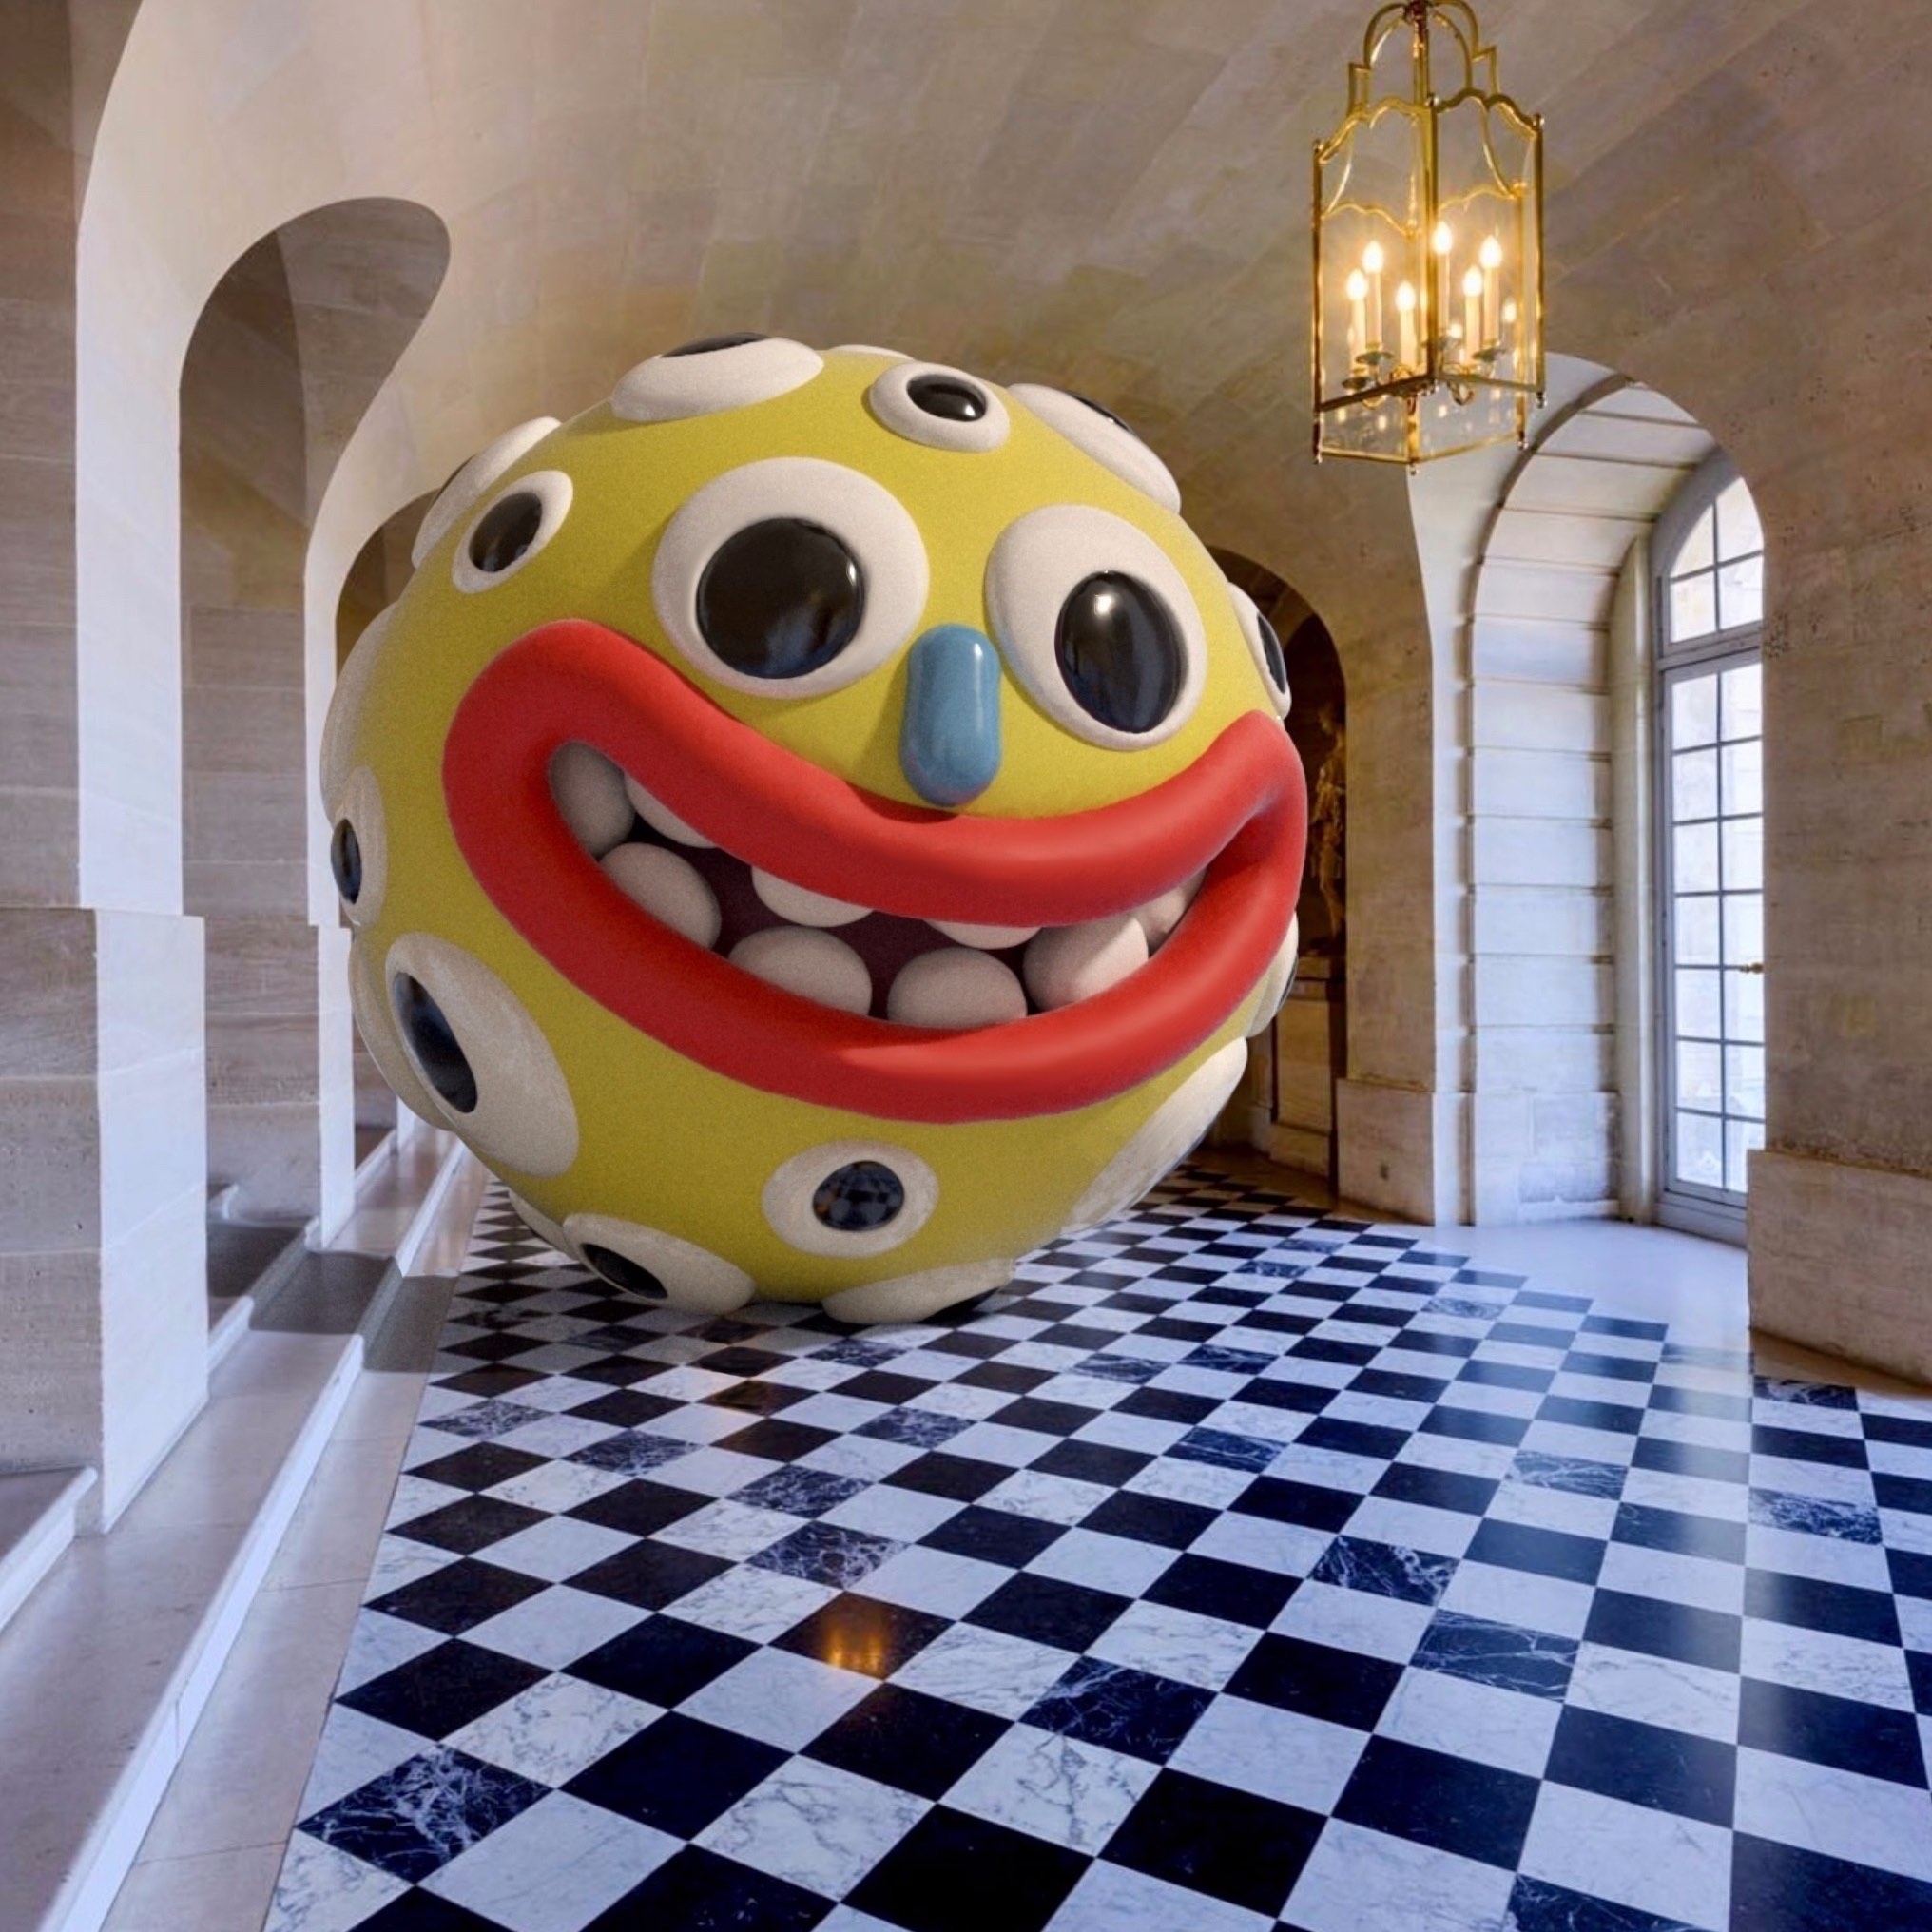 BobbyBlobby JOY x Versailles Multi Eye Smiley Guy in the Palace of Versailles Low Gallery